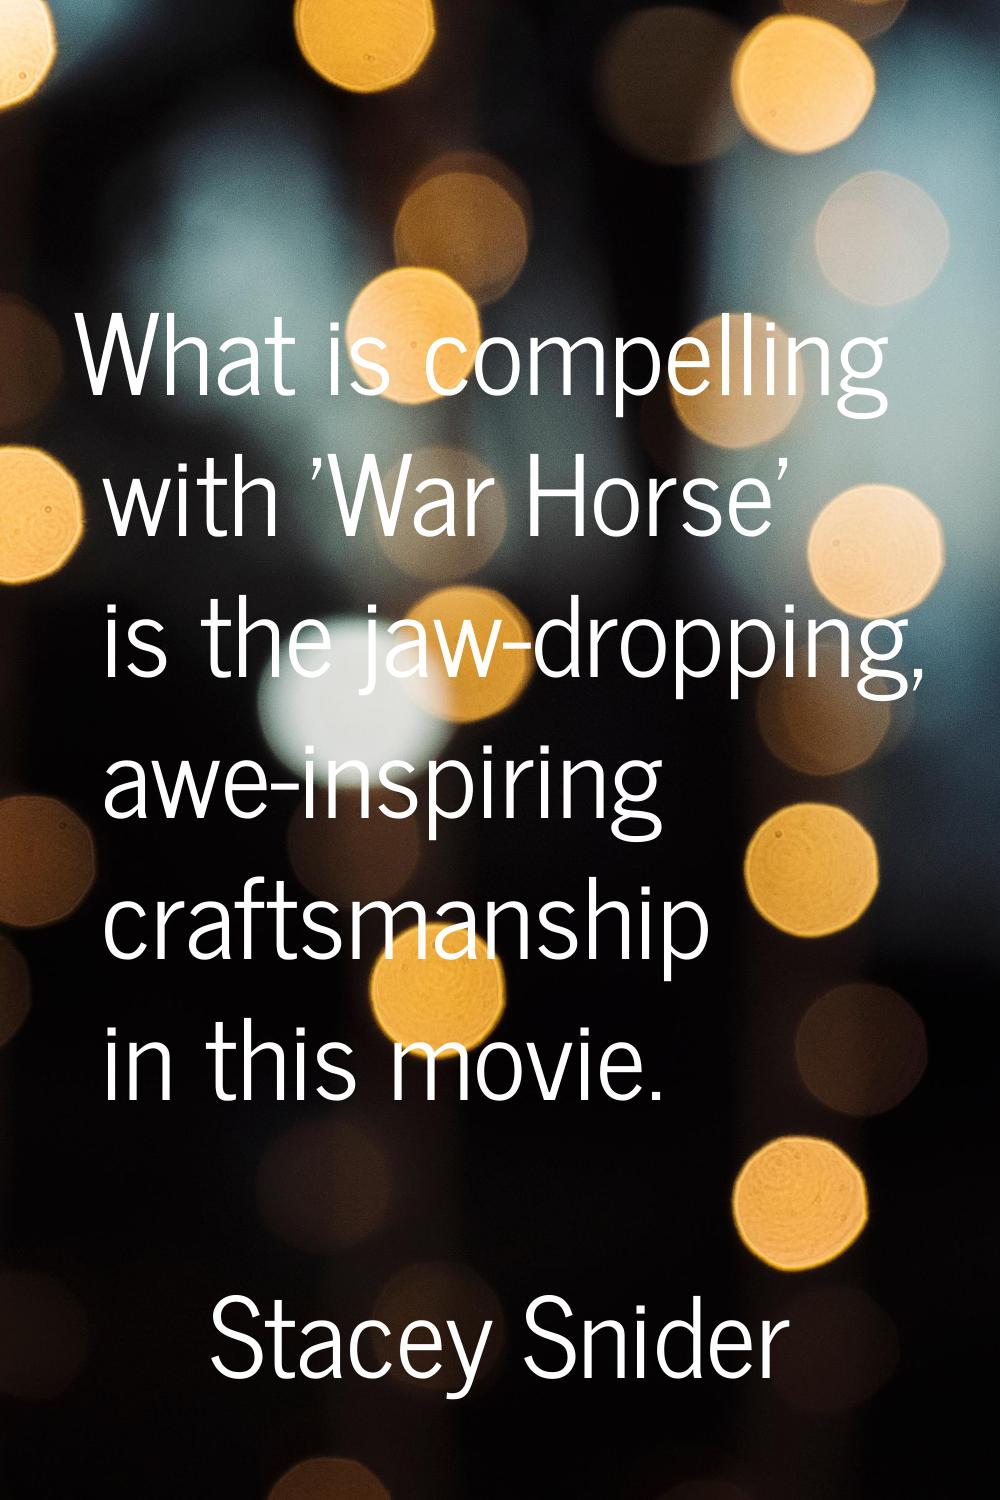 What is compelling with 'War Horse' is the jaw-dropping, awe-inspiring craftsmanship in this movie.